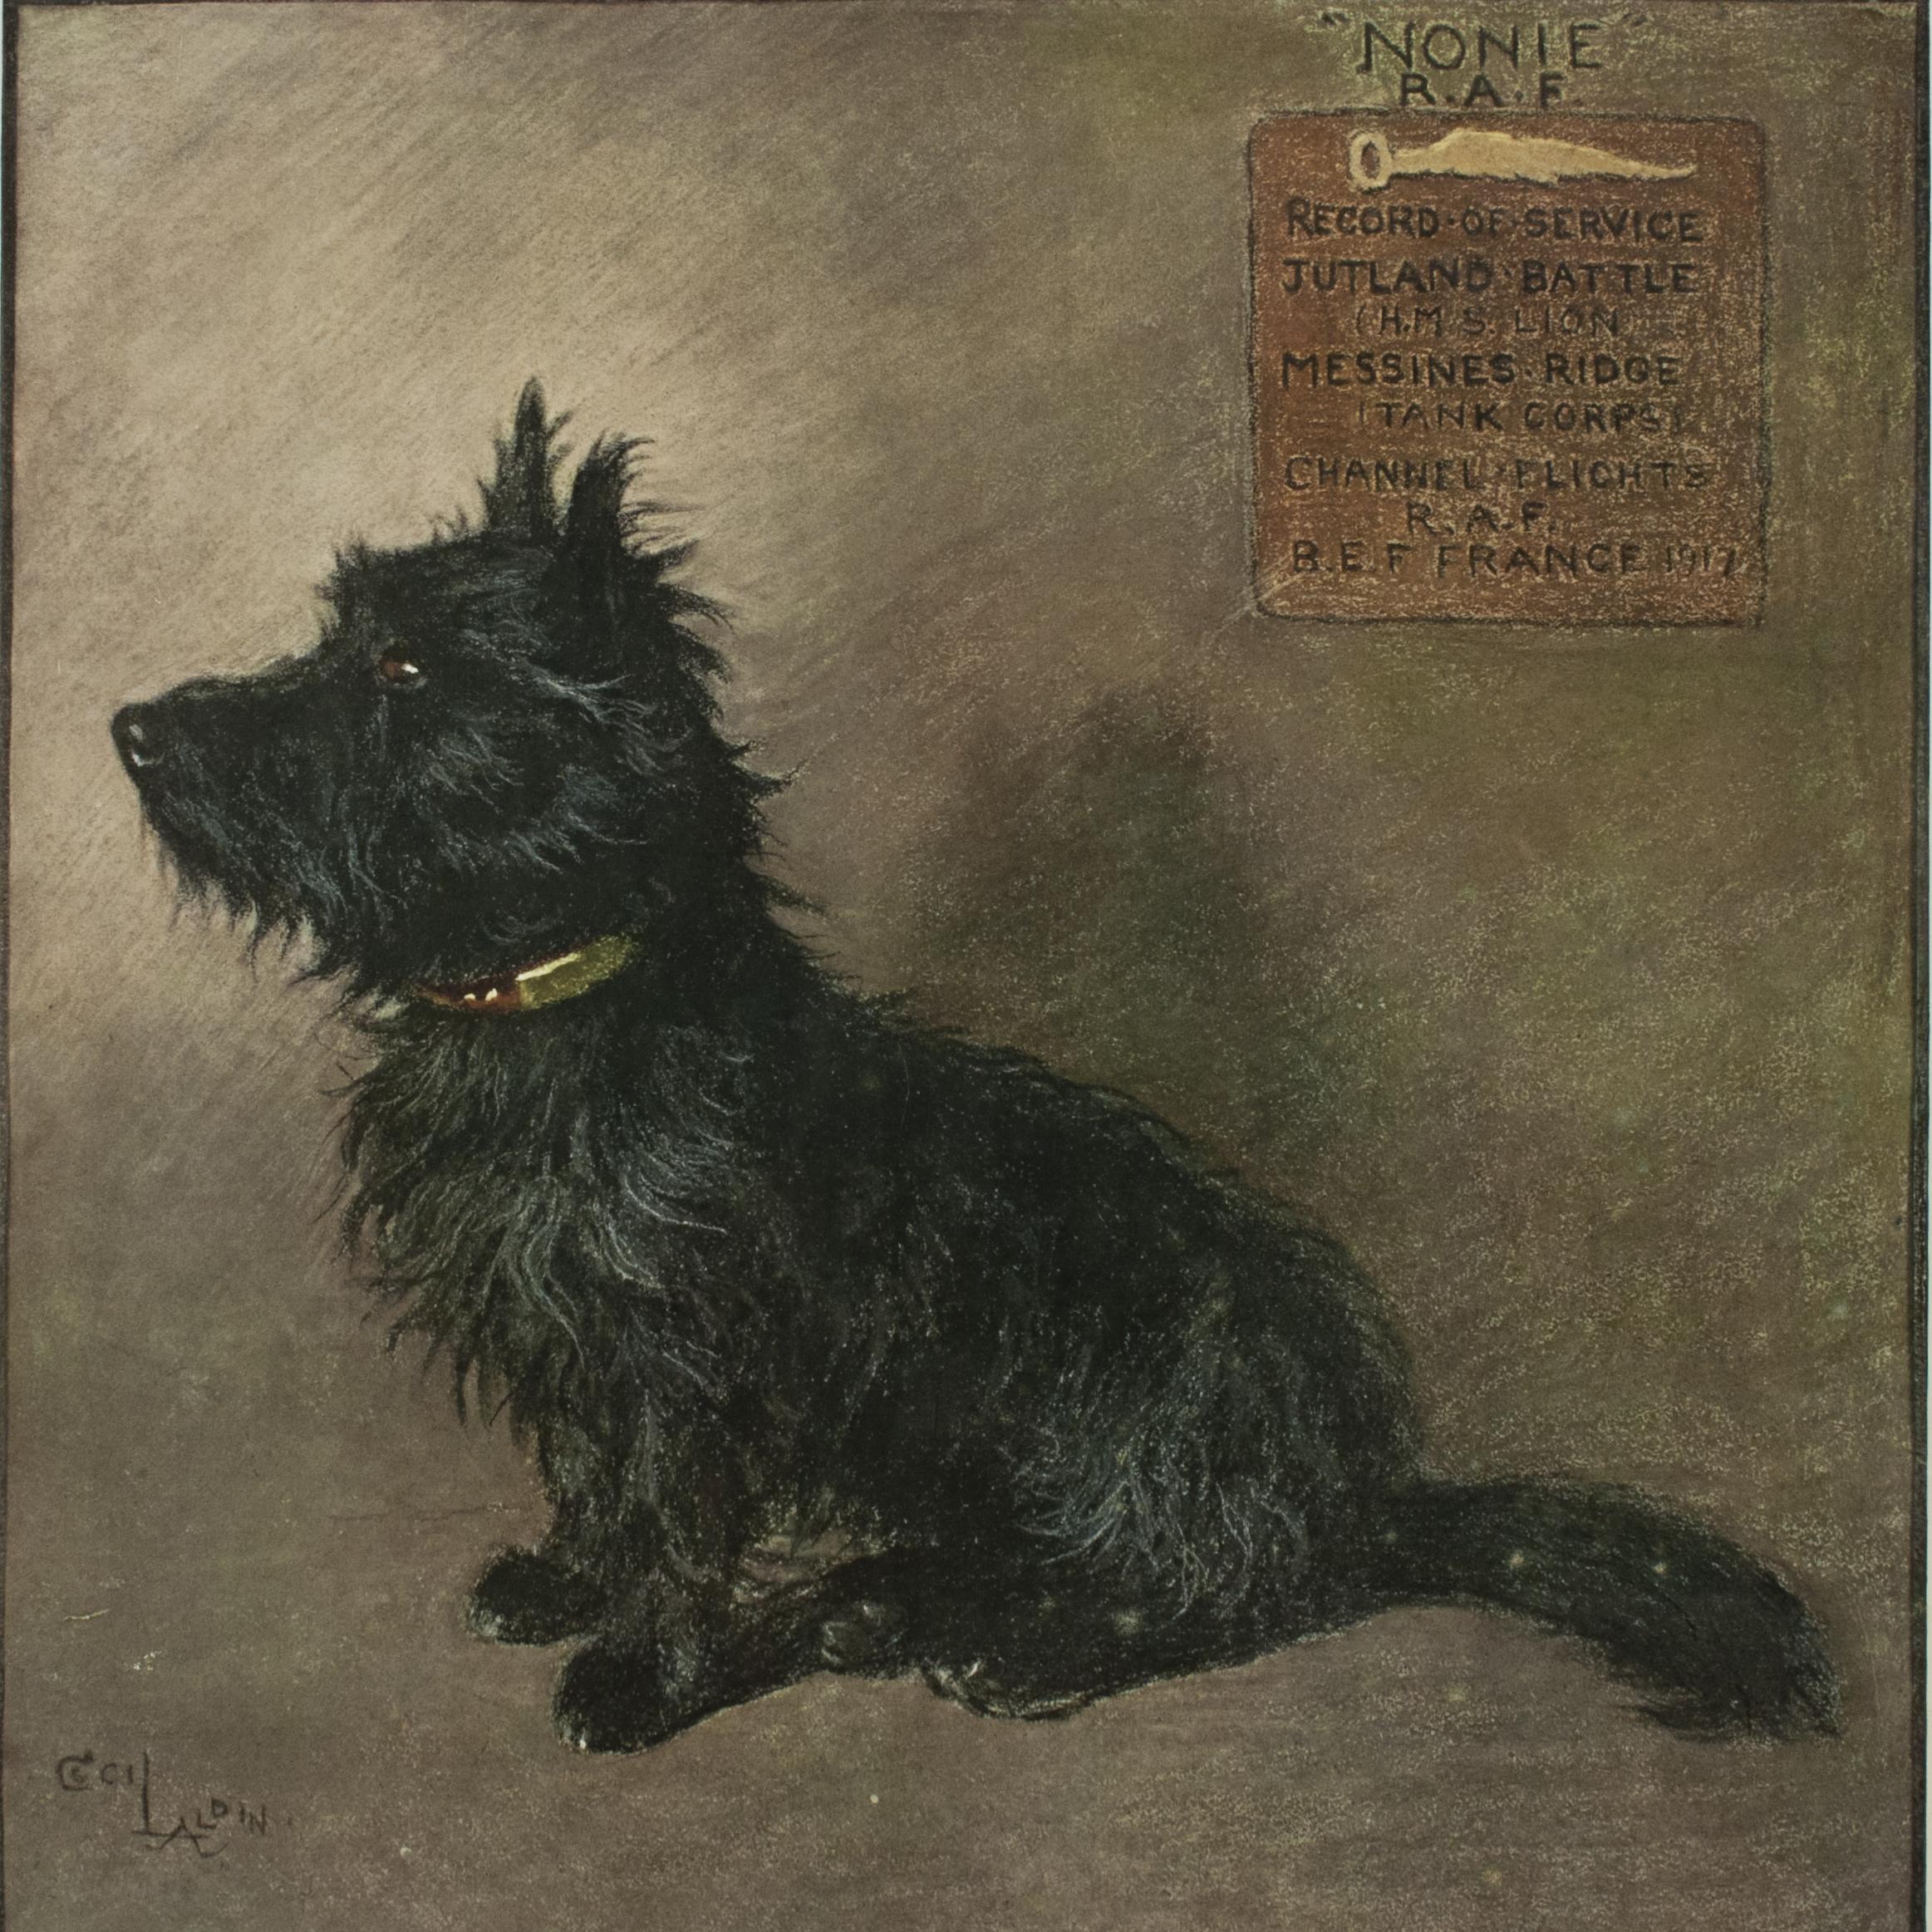 Dogs of Character, Nonie A Scotch Terrier, R.A.F.
A Cecil Aldin print, Nonie, the study of the RAF canine, a black Scottie dog published by Richard Wyman & Co. Ltd. Within the print is a record of service for Nonie: -R.A.F. Record of service,